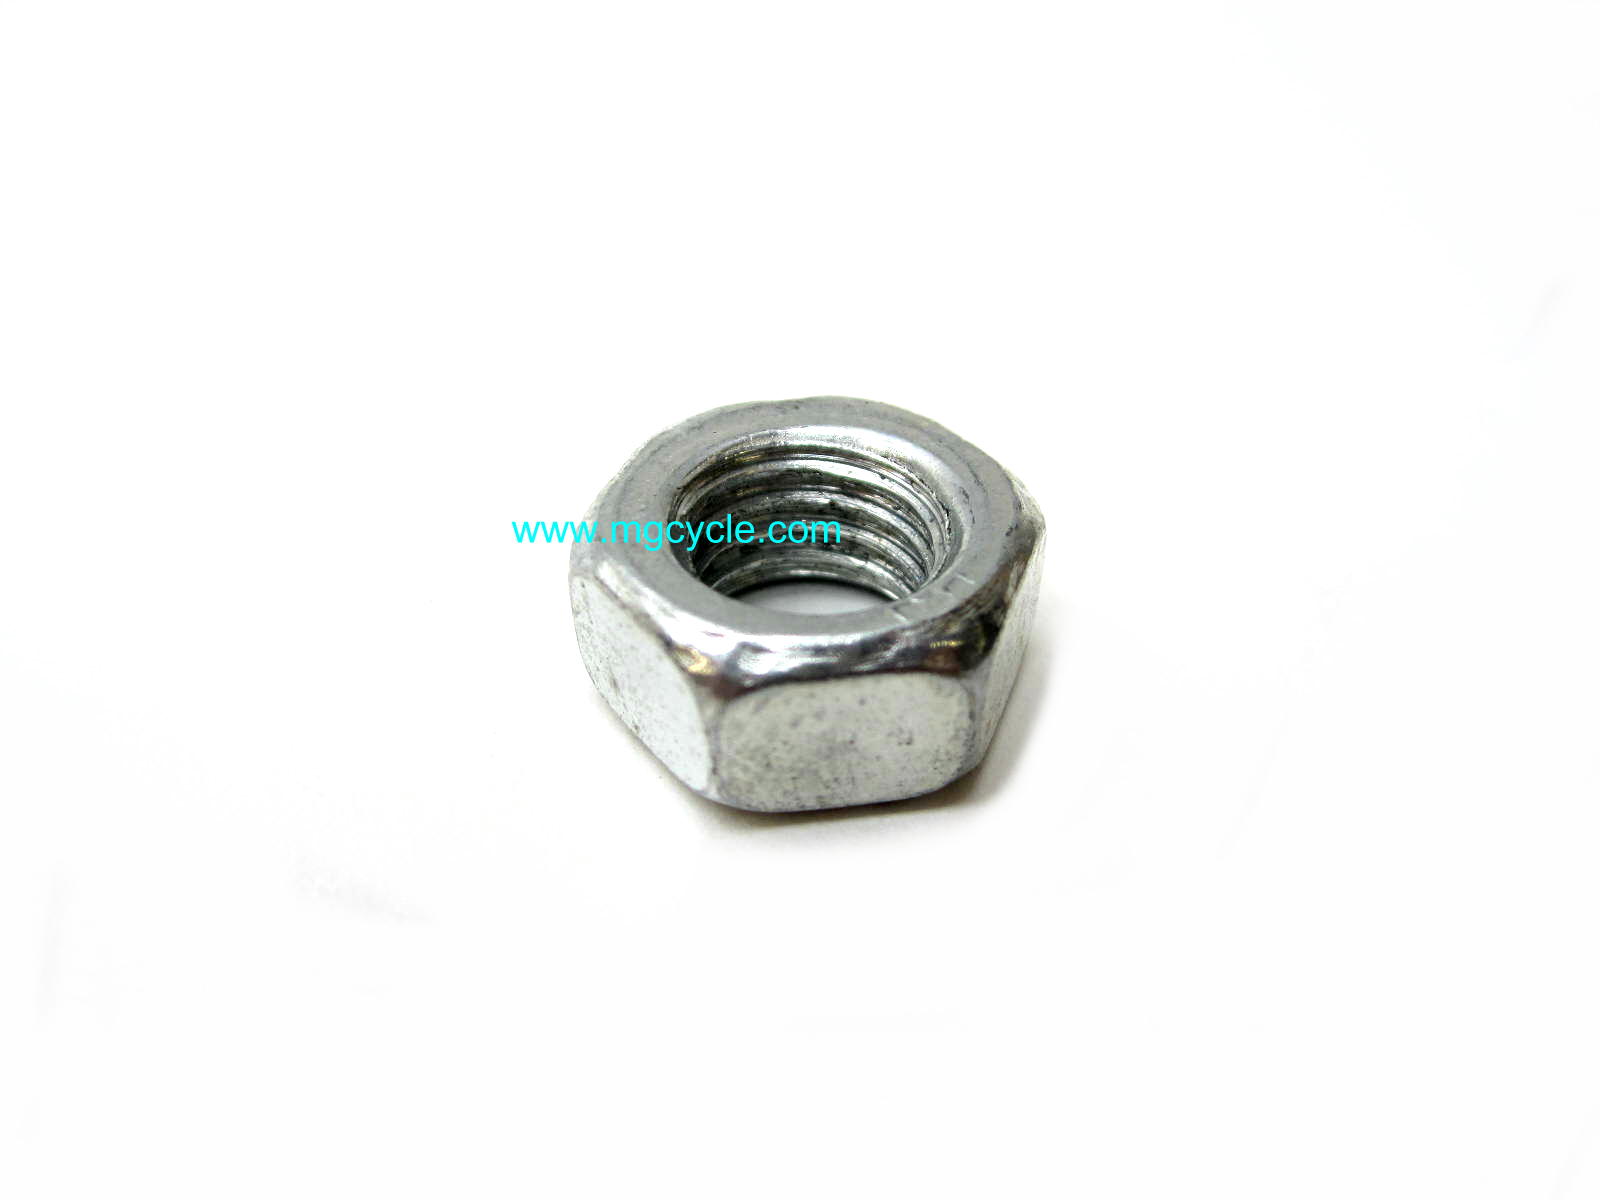 Nut, 12mm 1.5 pitch for Engine and Trans bolts V700 Amb Eldo